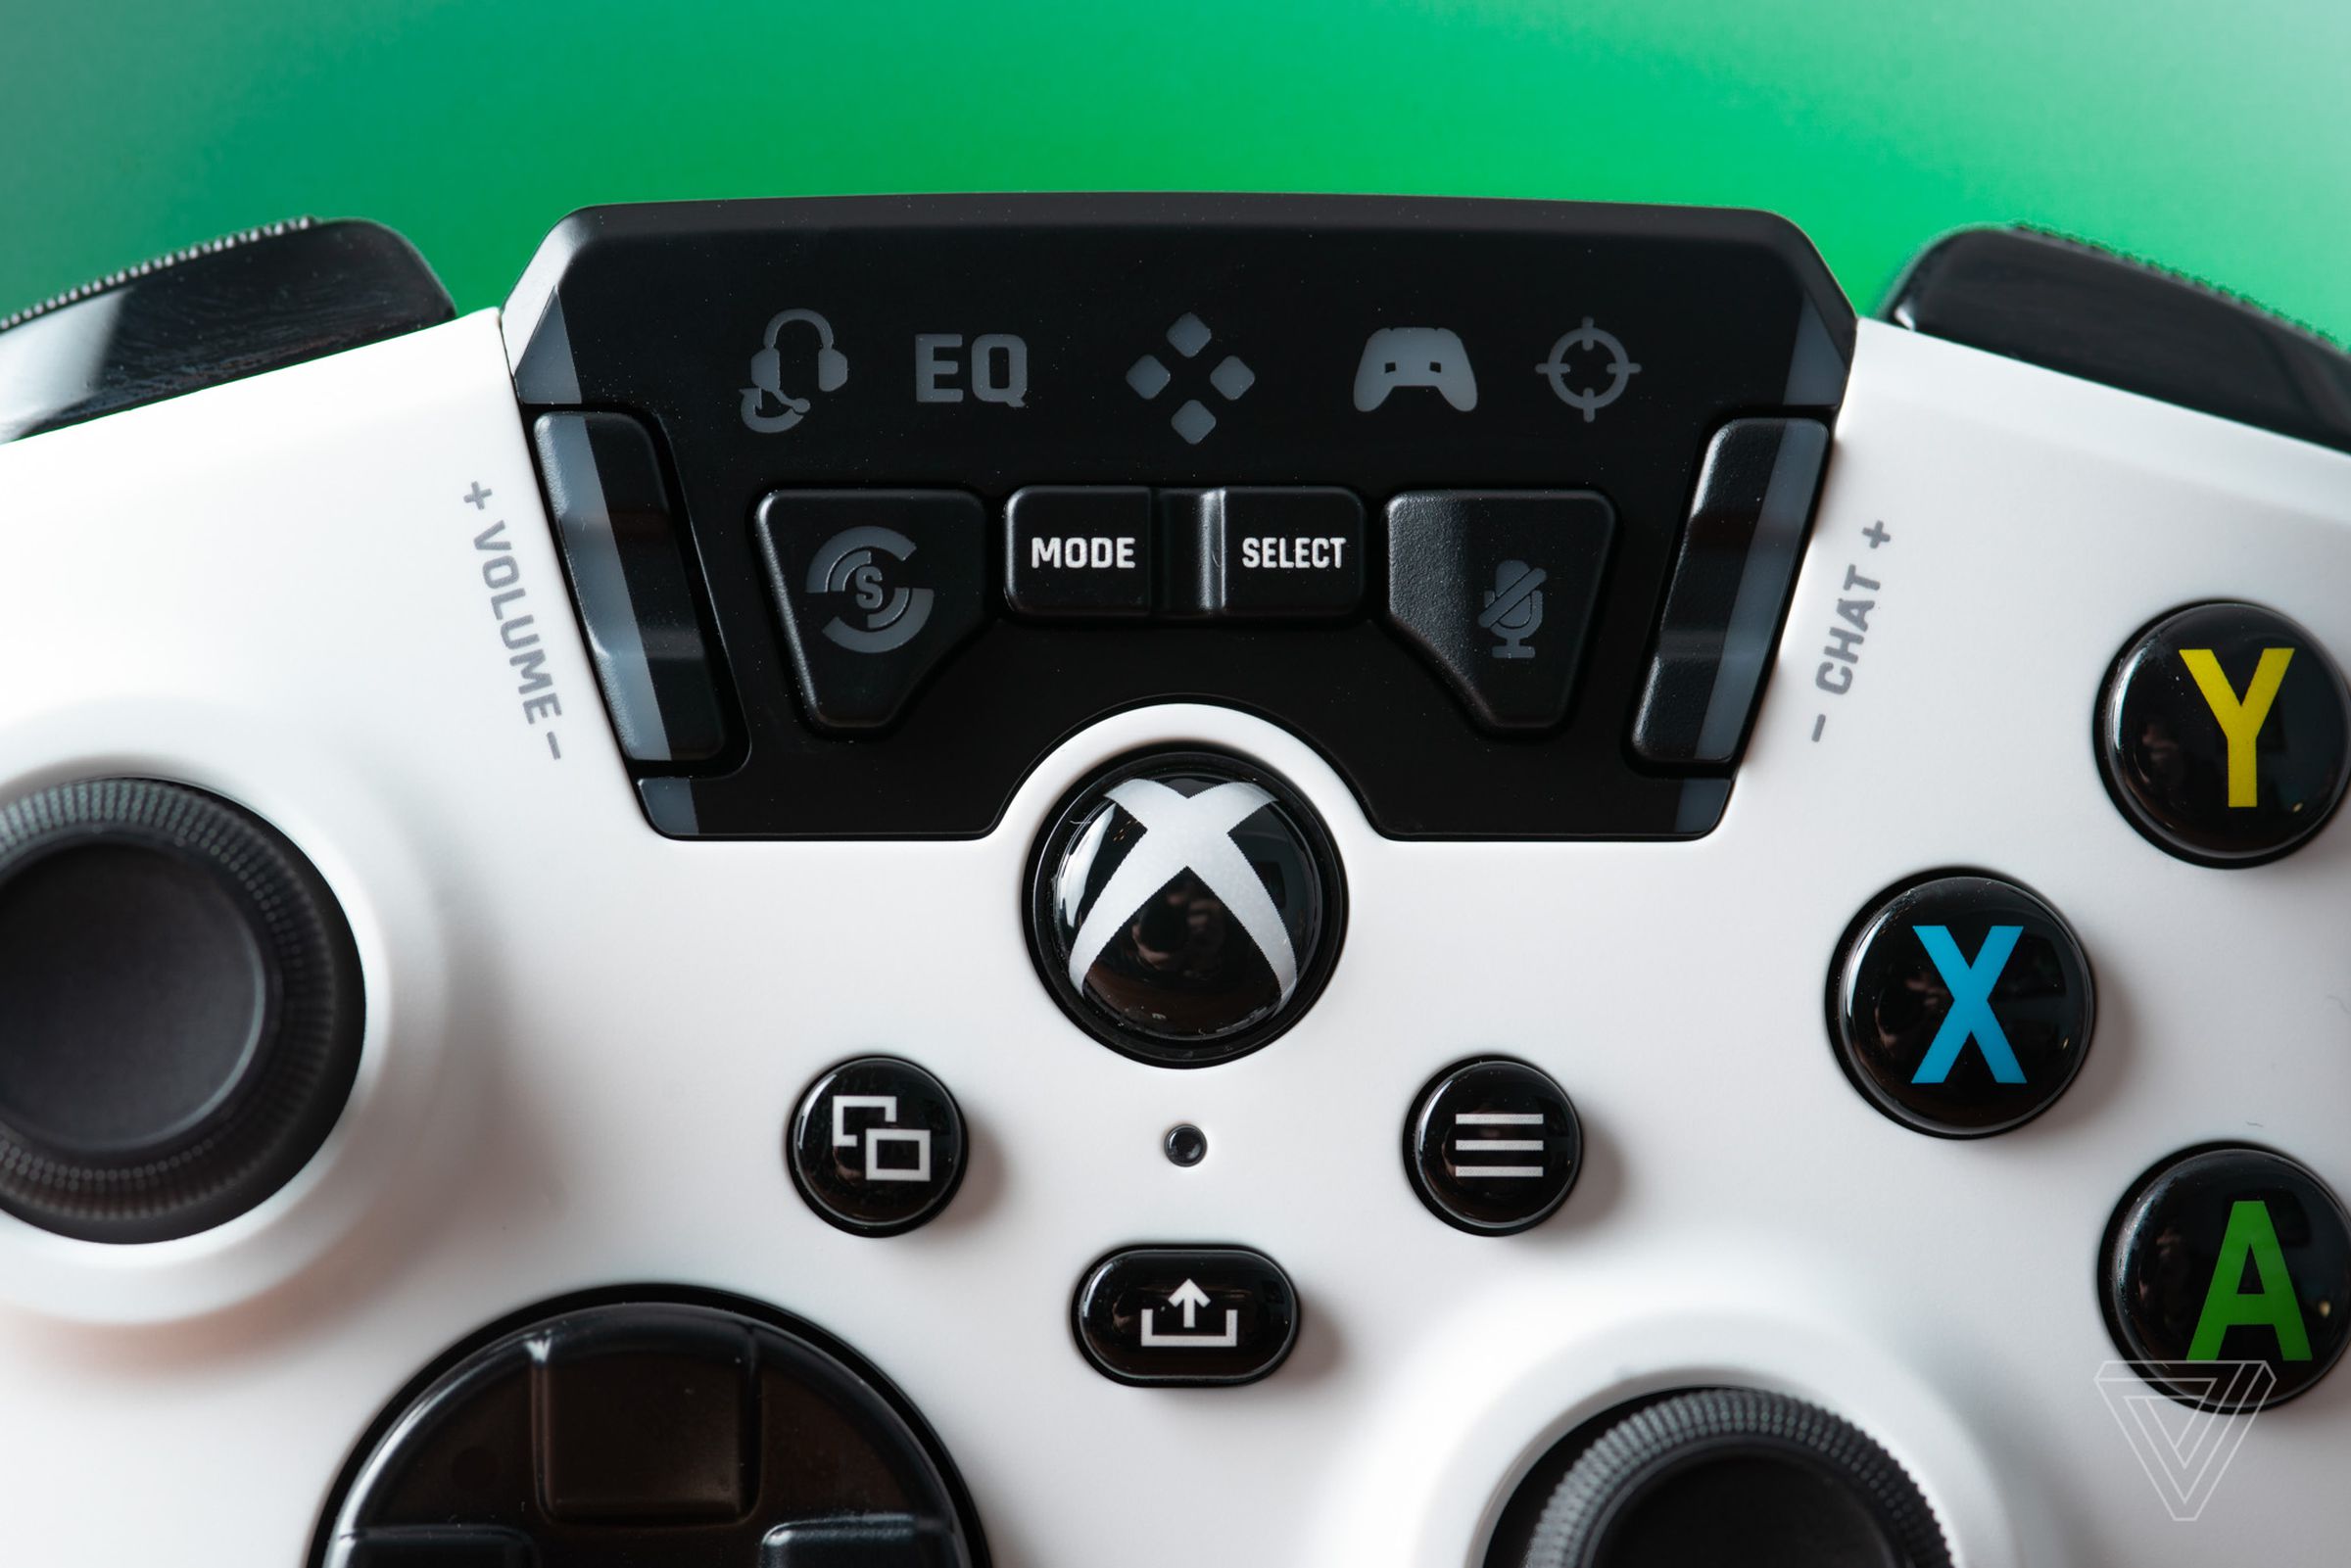 A closeup of the button cluster for audio controls on the face of the Turtle Beach Recon controller.